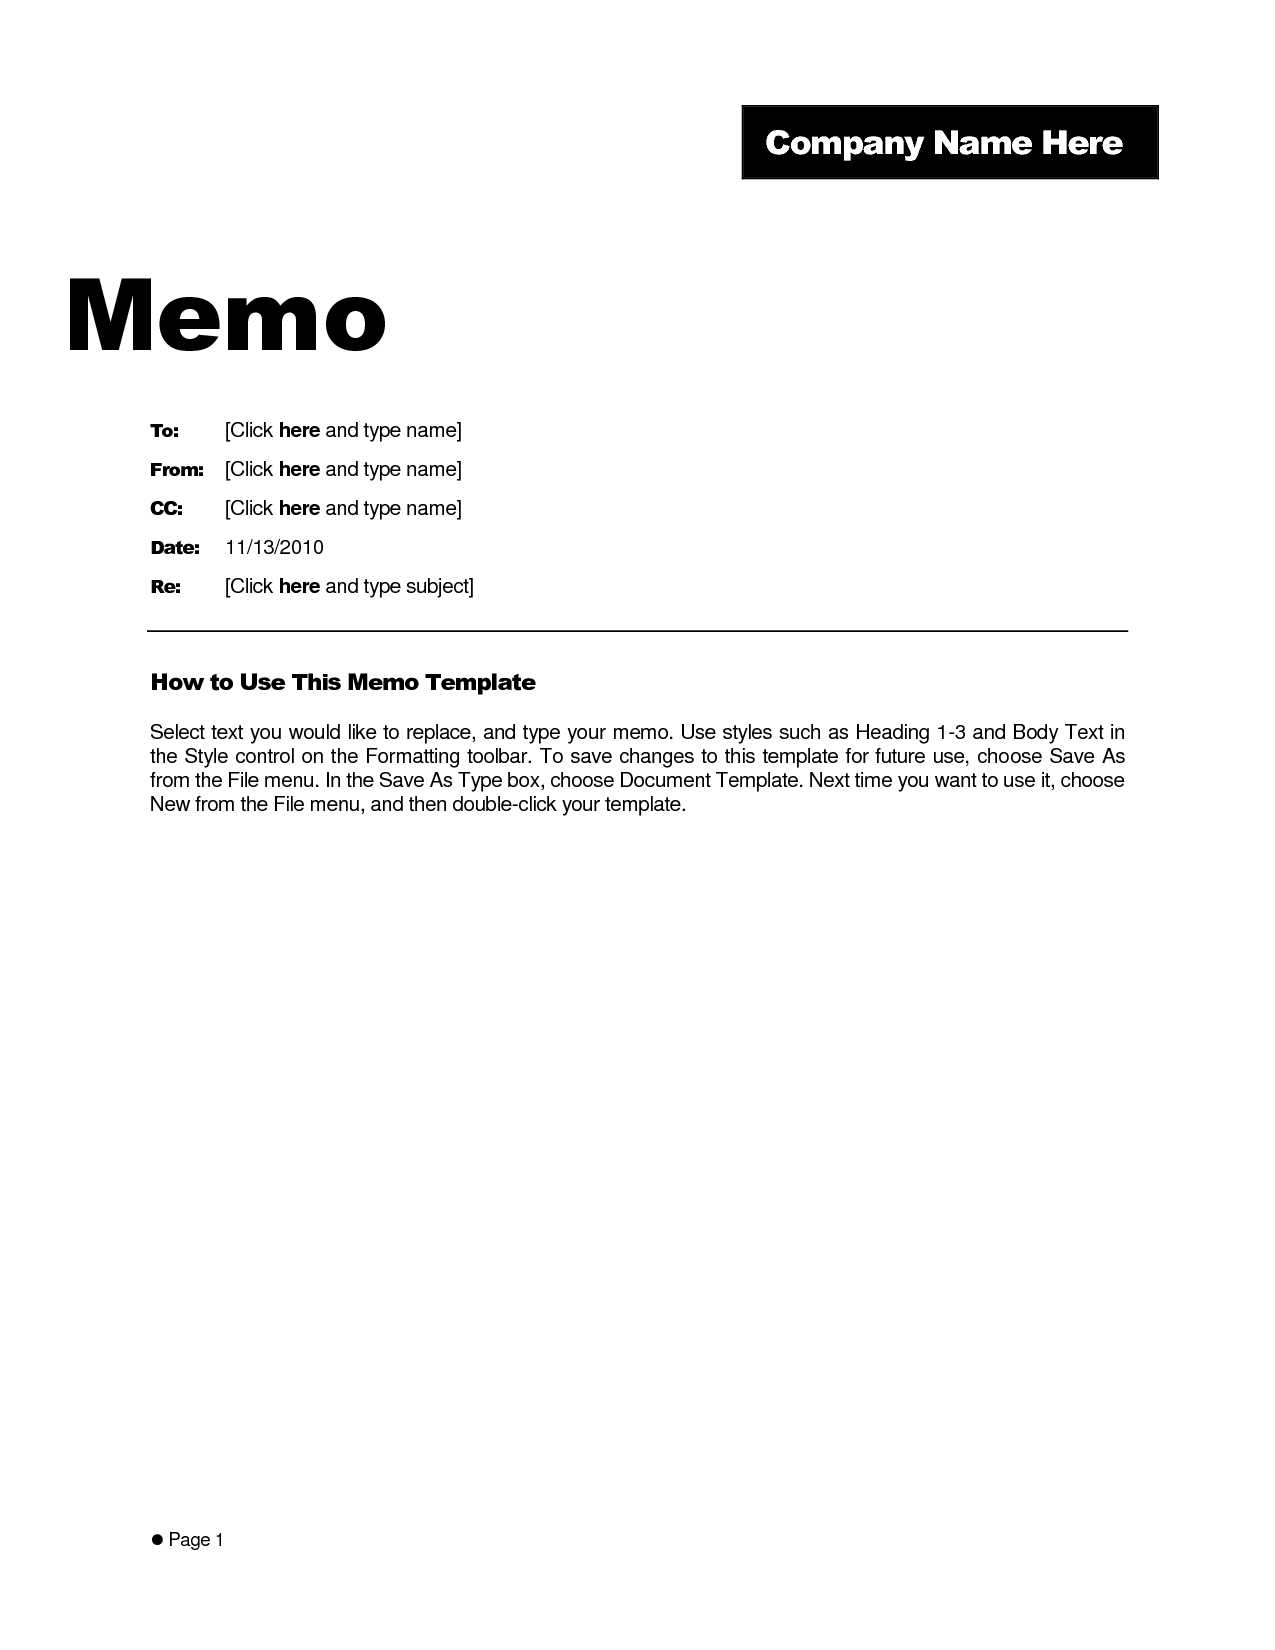 Microsoft Word Memo Template Example – Teplates For Every Day With Regard To Memo Template Word 2013